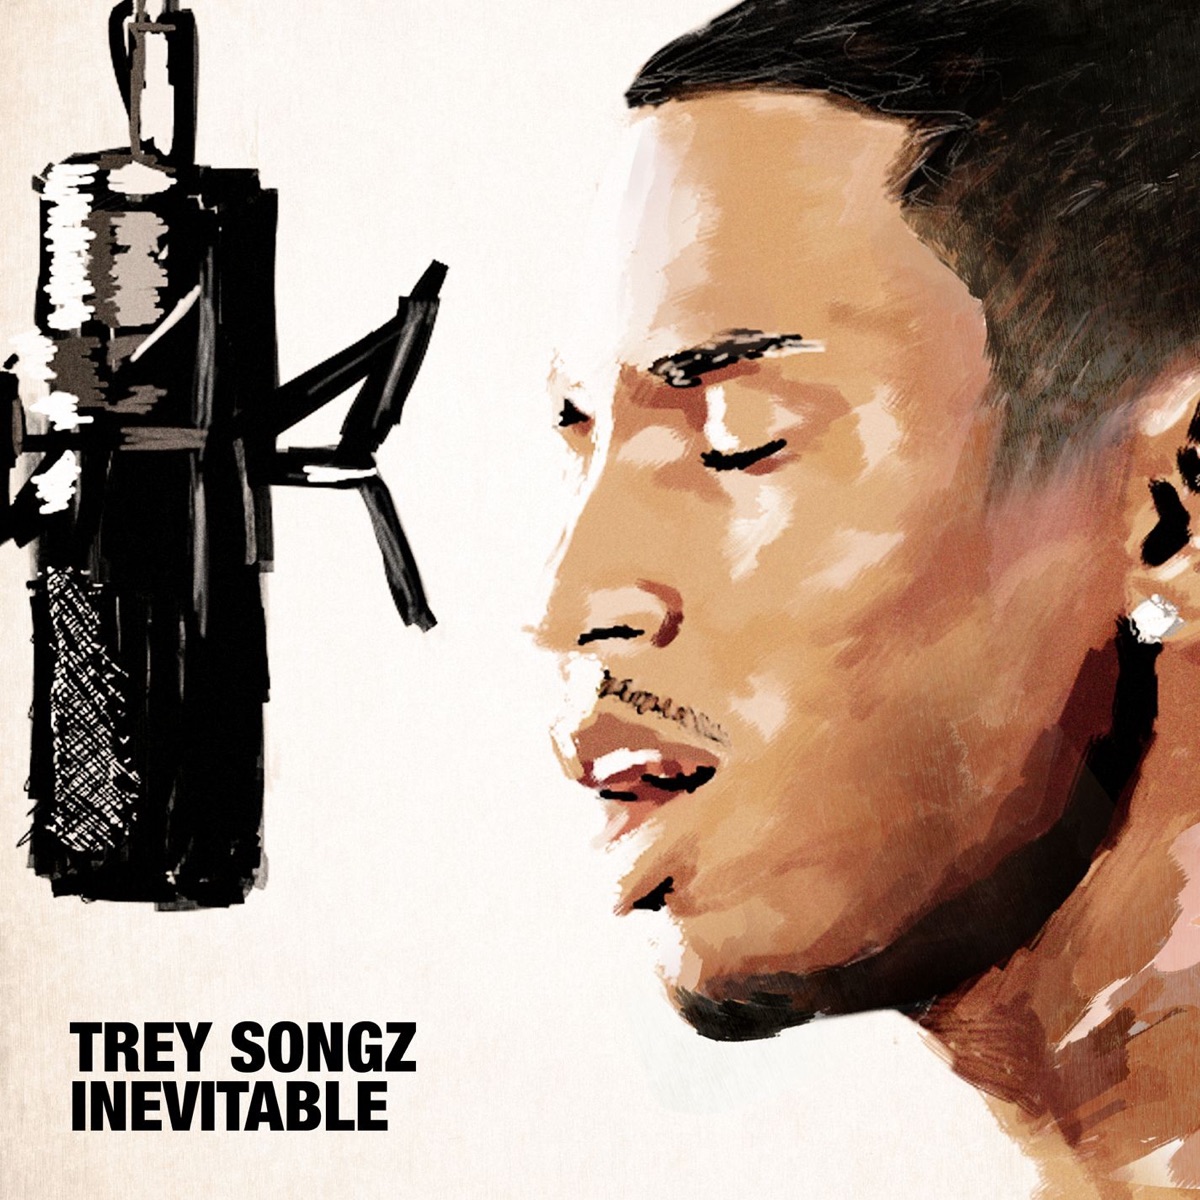 Festival acerca de grueso Chi Chi (feat. Chris Brown) - Single by Trey Songz on Apple Music